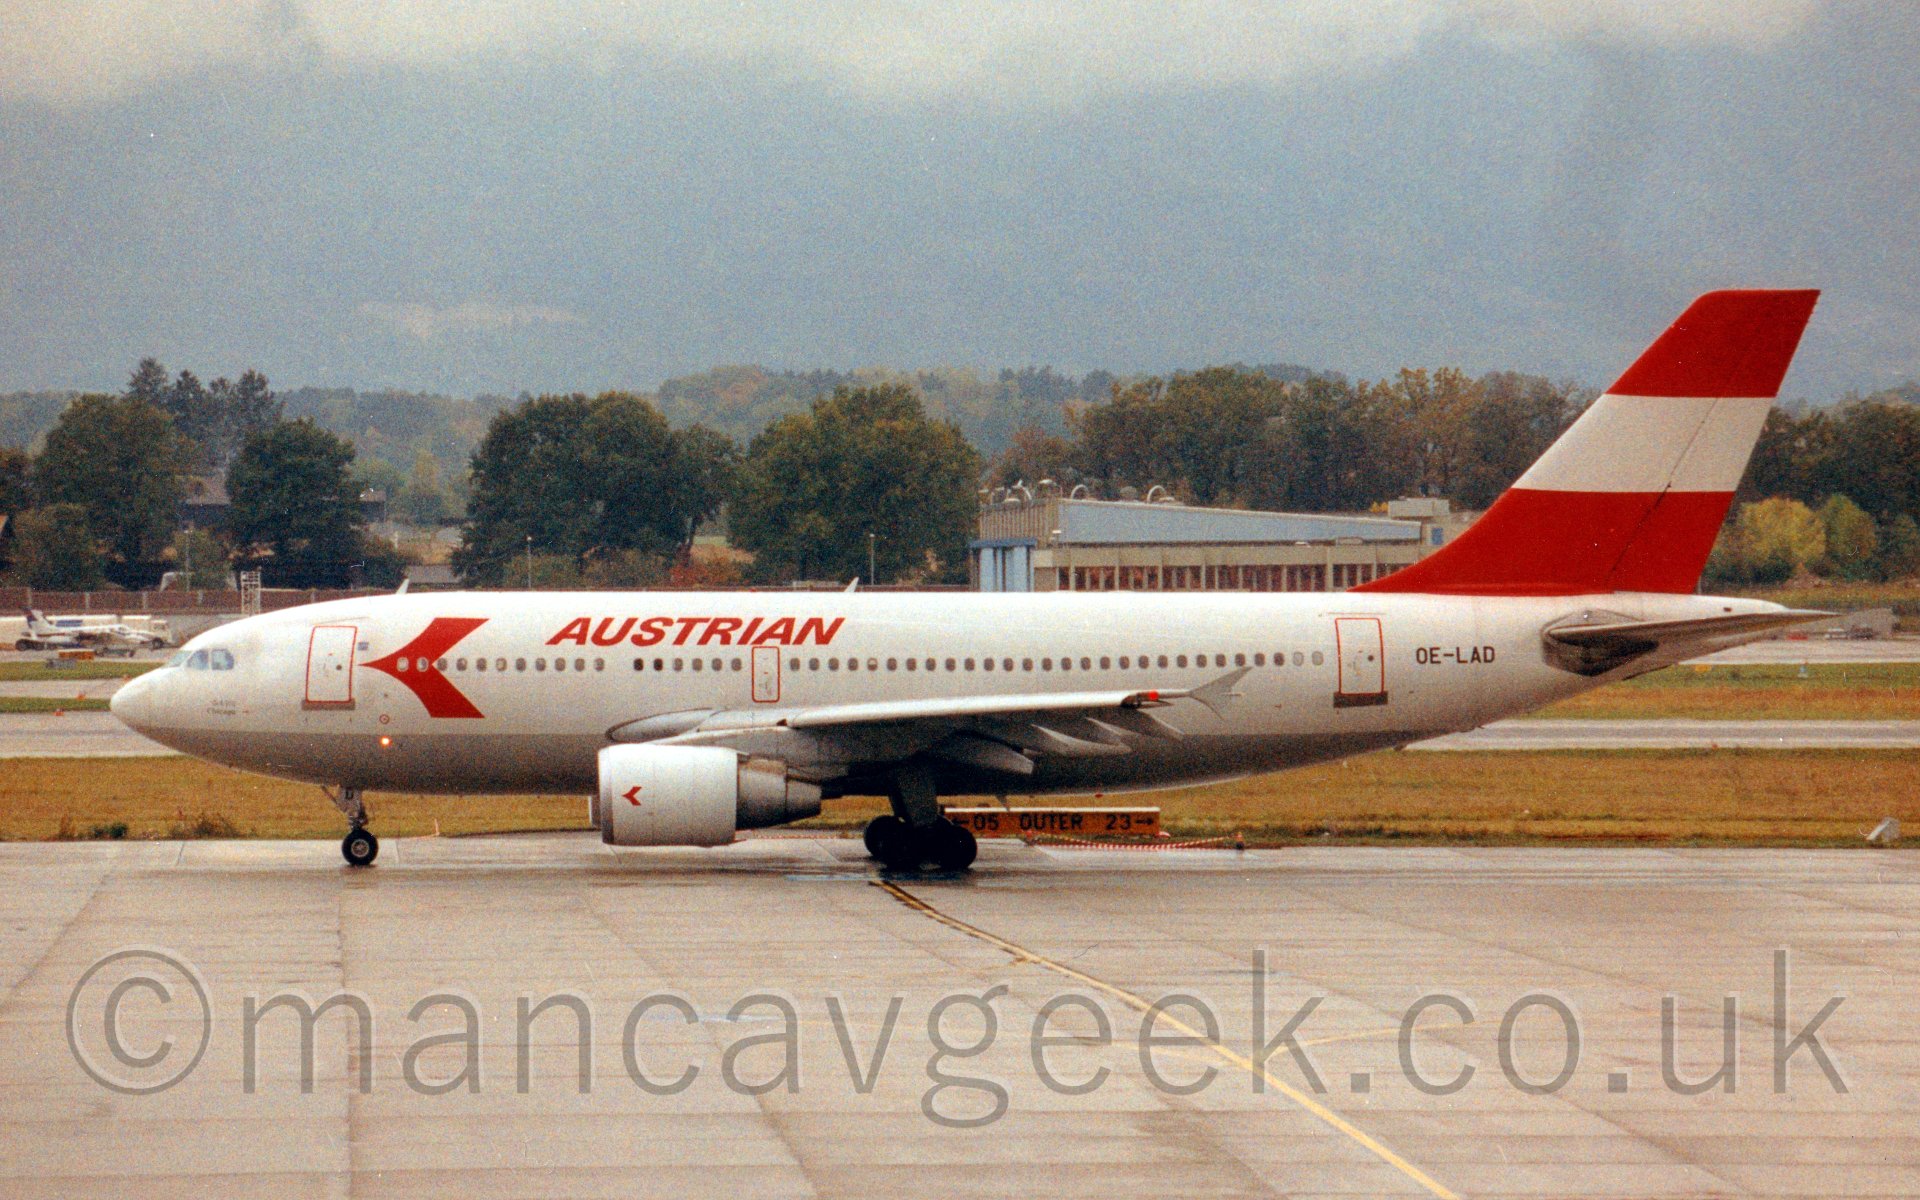 Side view of a twin engined jet airliner taxiing from right to left. The plane is mostly white, with a silver belly, and a large red arrowhead on the forward fuselage, with red "Austrian" titles immediately after. The tail is mostly red, with a thick white stripe. Behind is a view across the runway to a hangar on the far side, with some light aircraft parked in front.